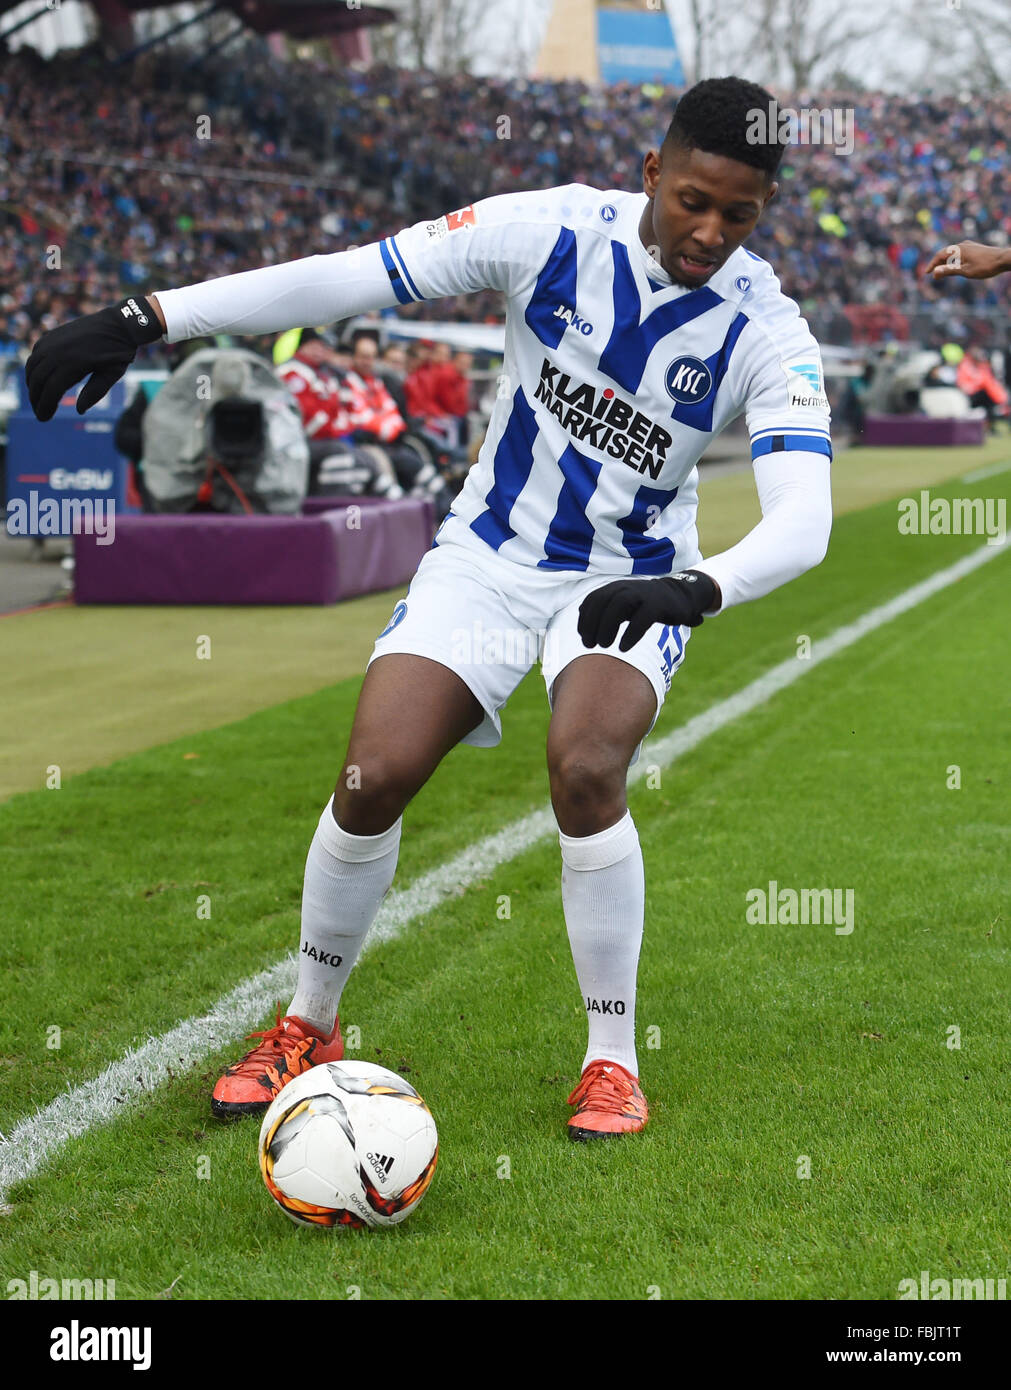 Karlsruhe, Germany. 16th Jan, 2016. Karlsruher's Boubacar Barry during the test match between Karlsruher SC and FC Bayern Munich in Wildpark Stadium in Karlsruhe, Germany, 16 January 2016. Photo: ULI DECK/dpa/Alamy Live News Stock Photo